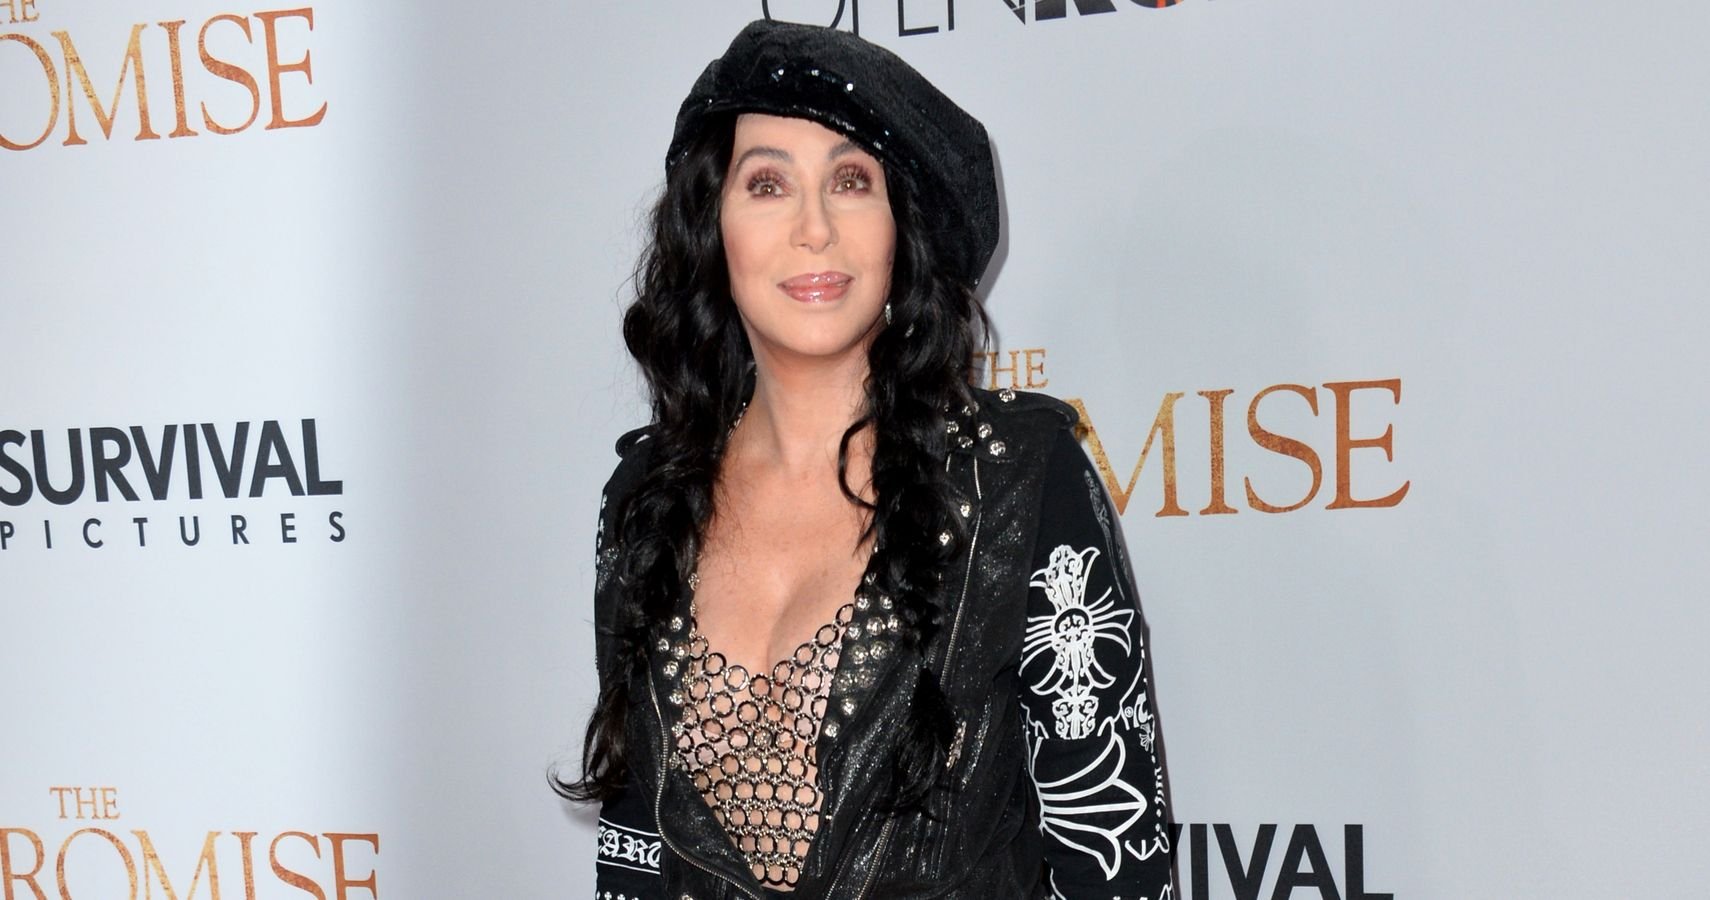 This Is Cher's Net Worth As Of 2021